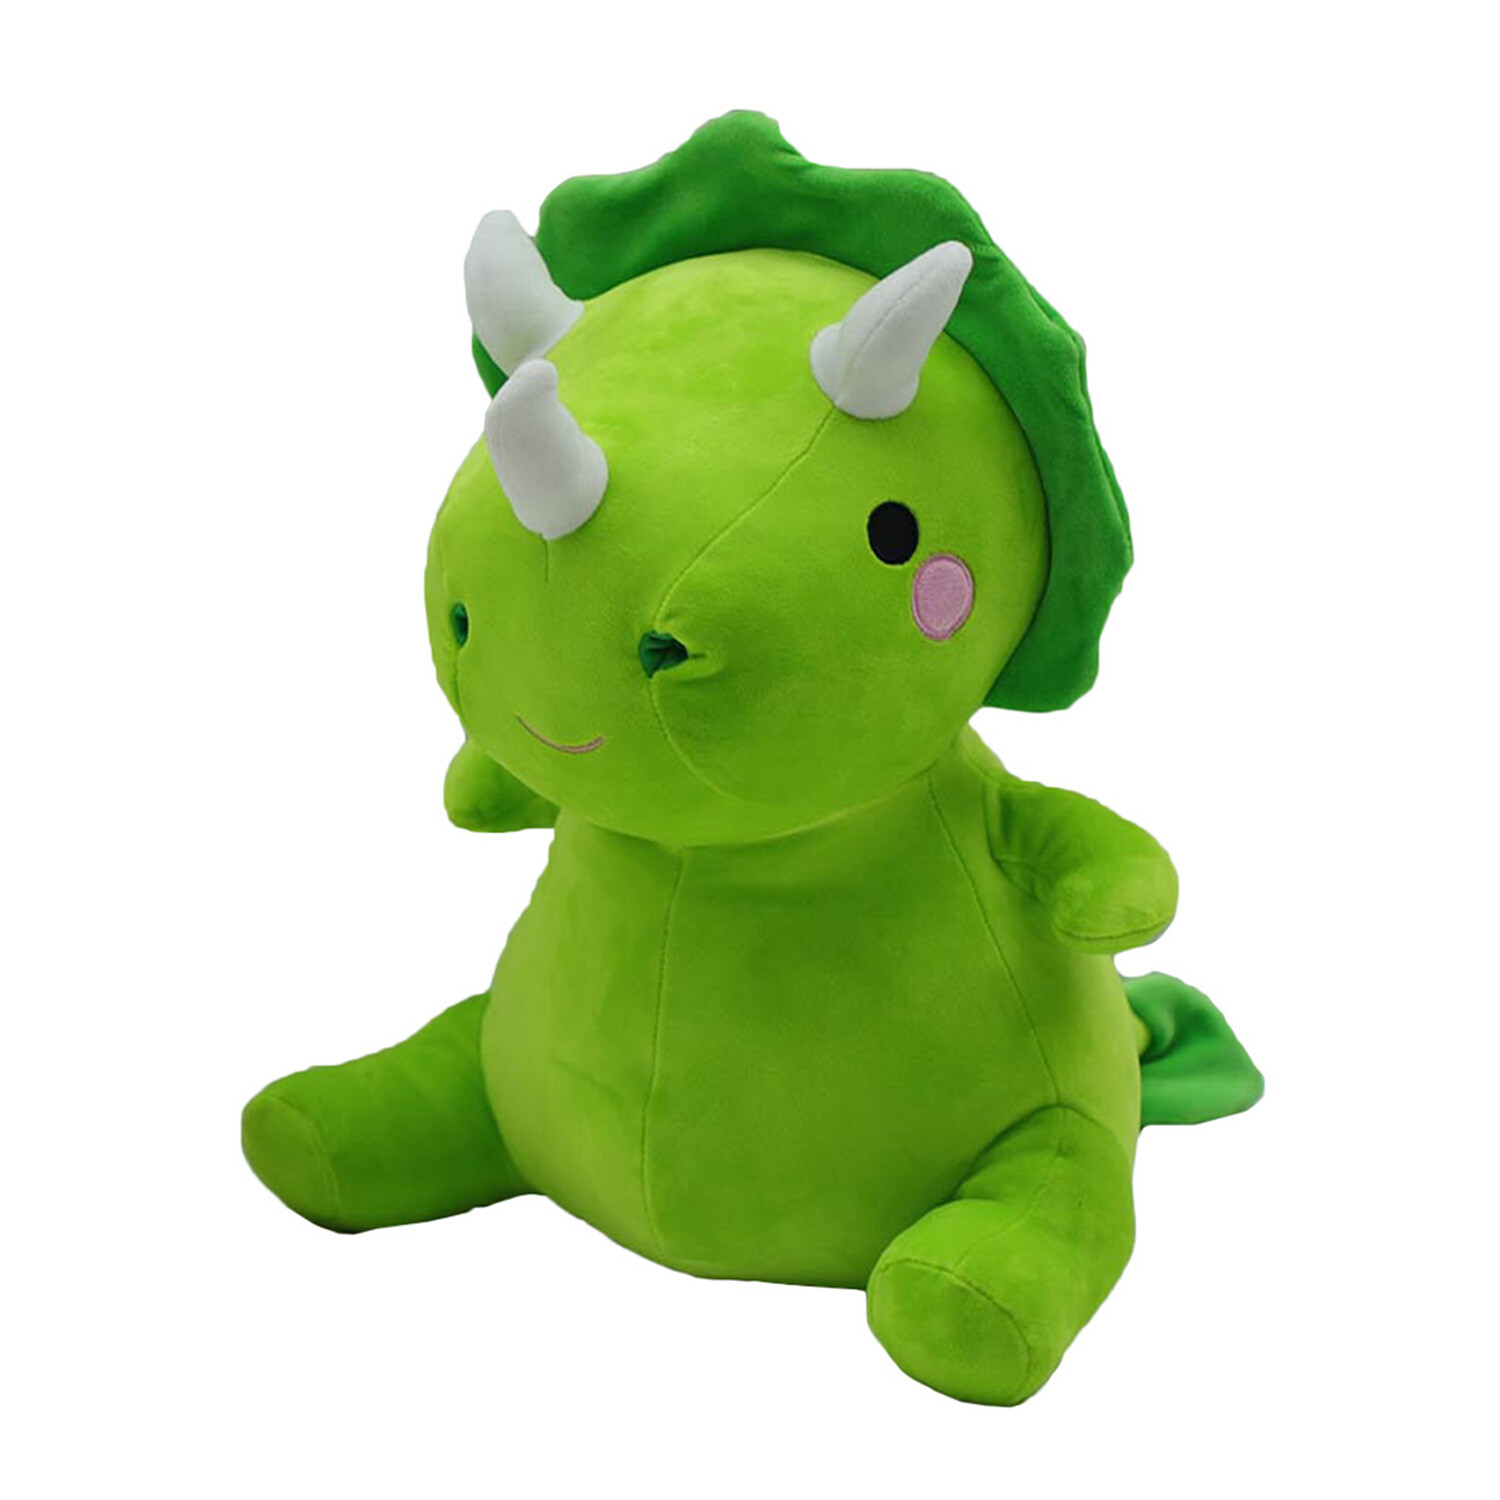 Super Soft Cuddly Character Image 1